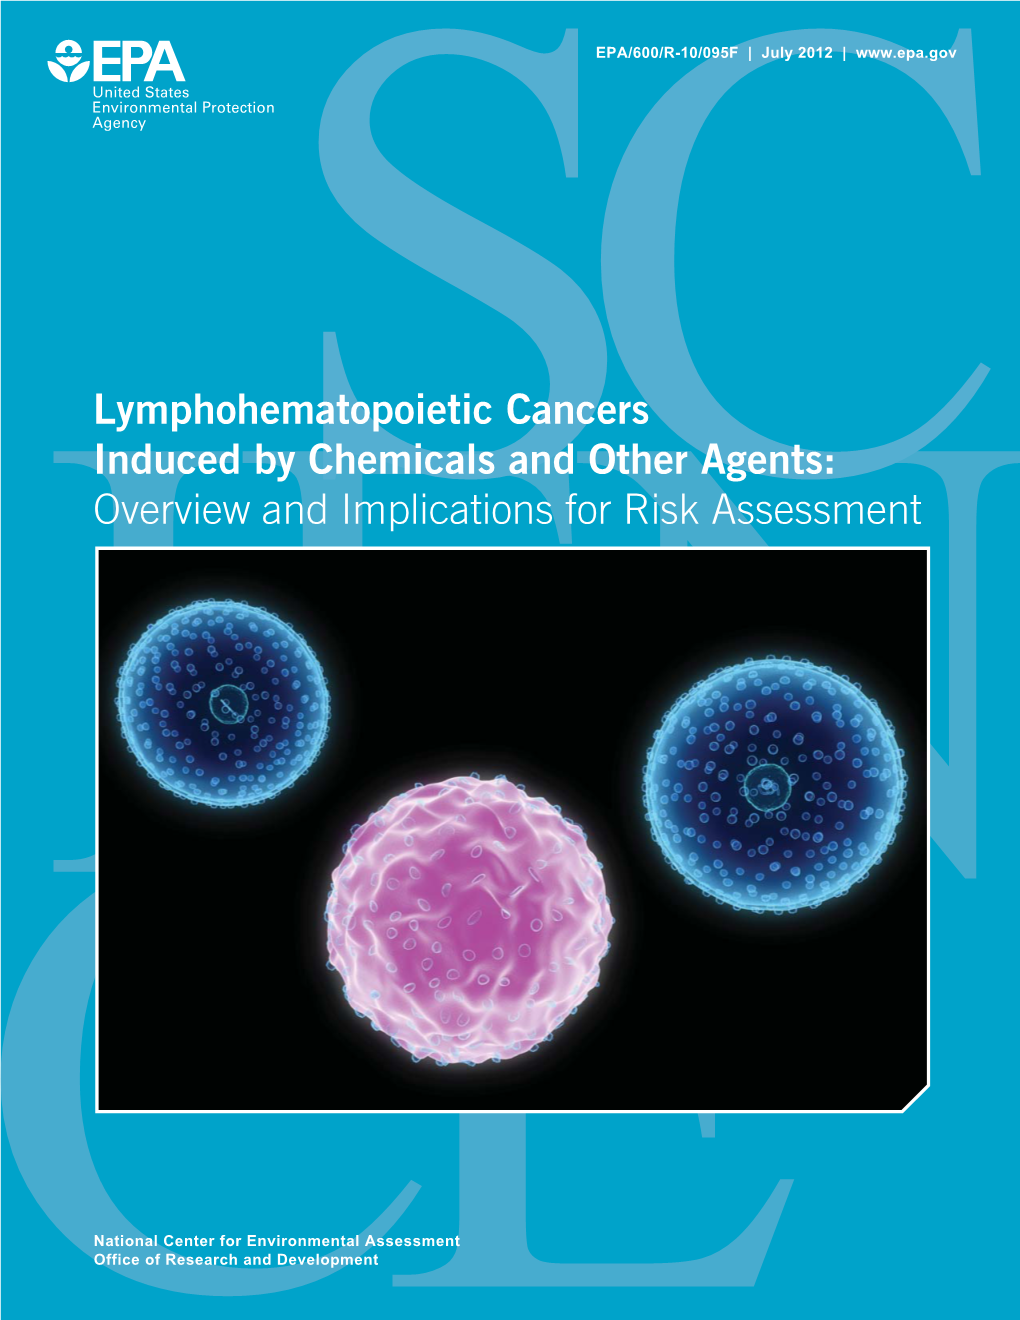 Lymphohematopoietic Cancers Induced by Chemicals and Other Agents: Overview and Implications for Risk Assessment